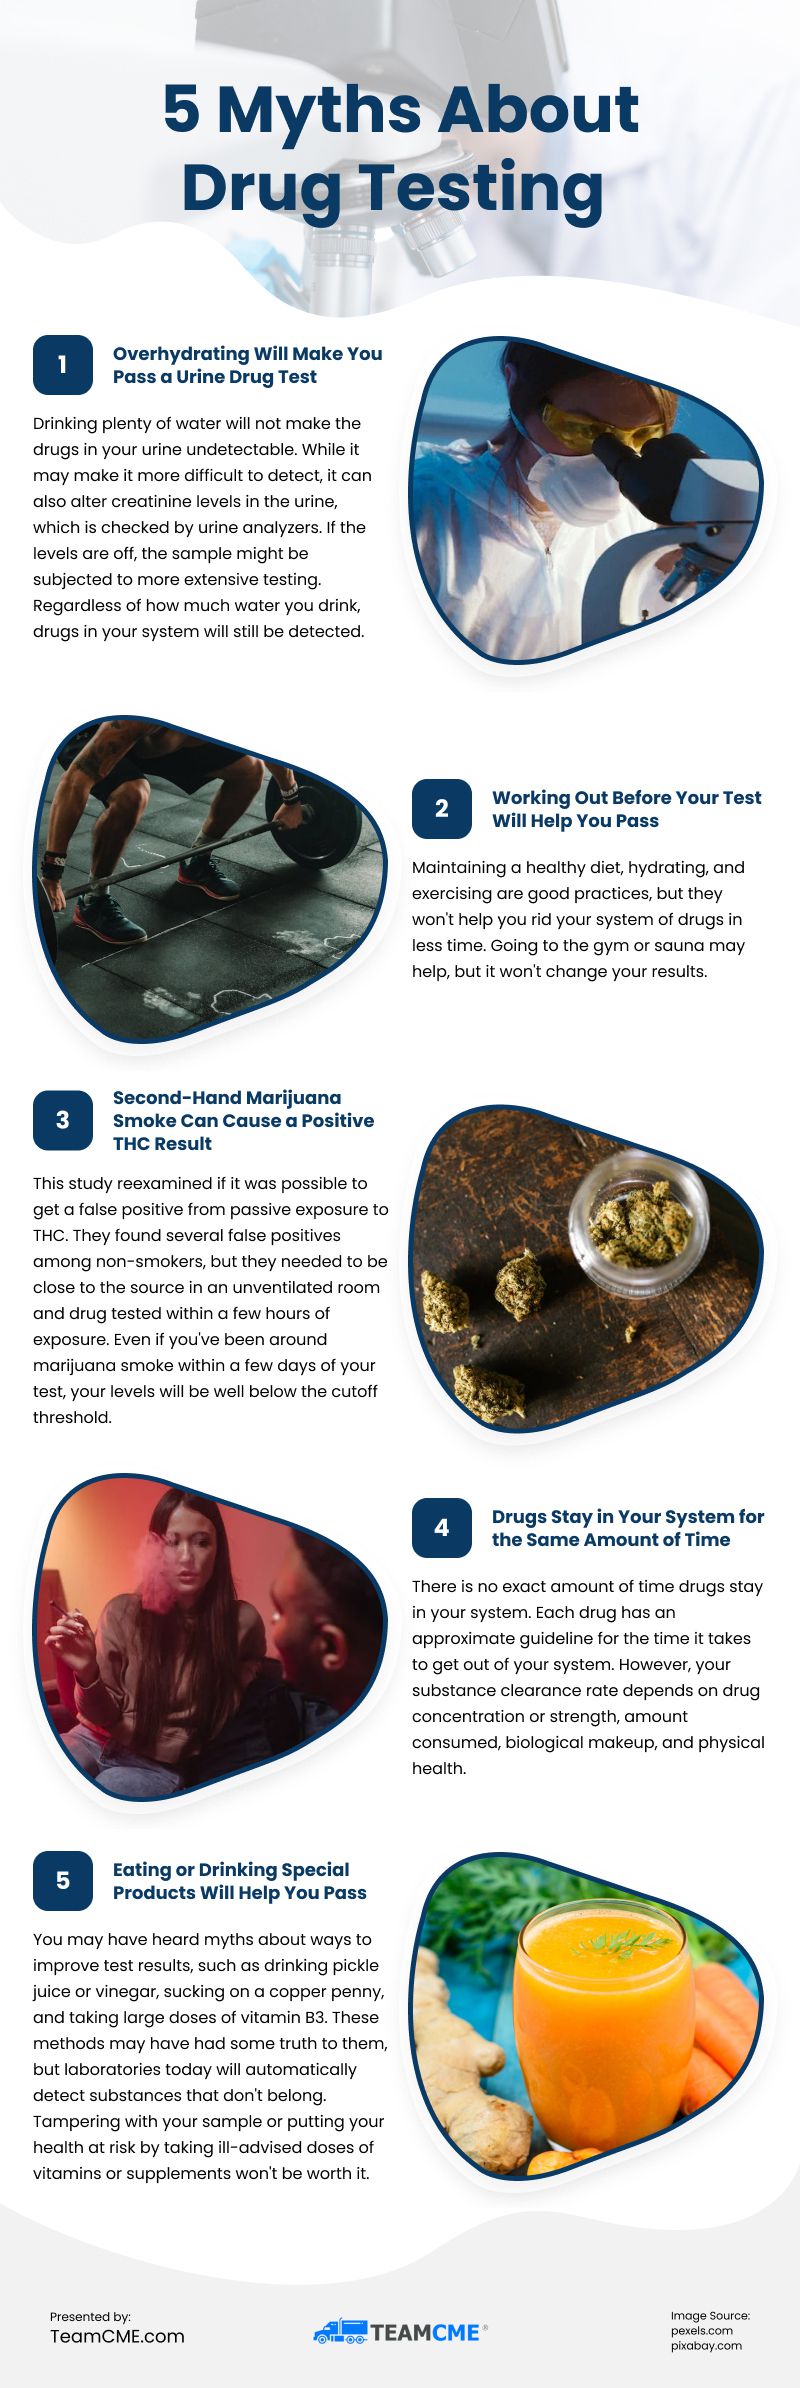 5 Myths About Drug Testing Infographic